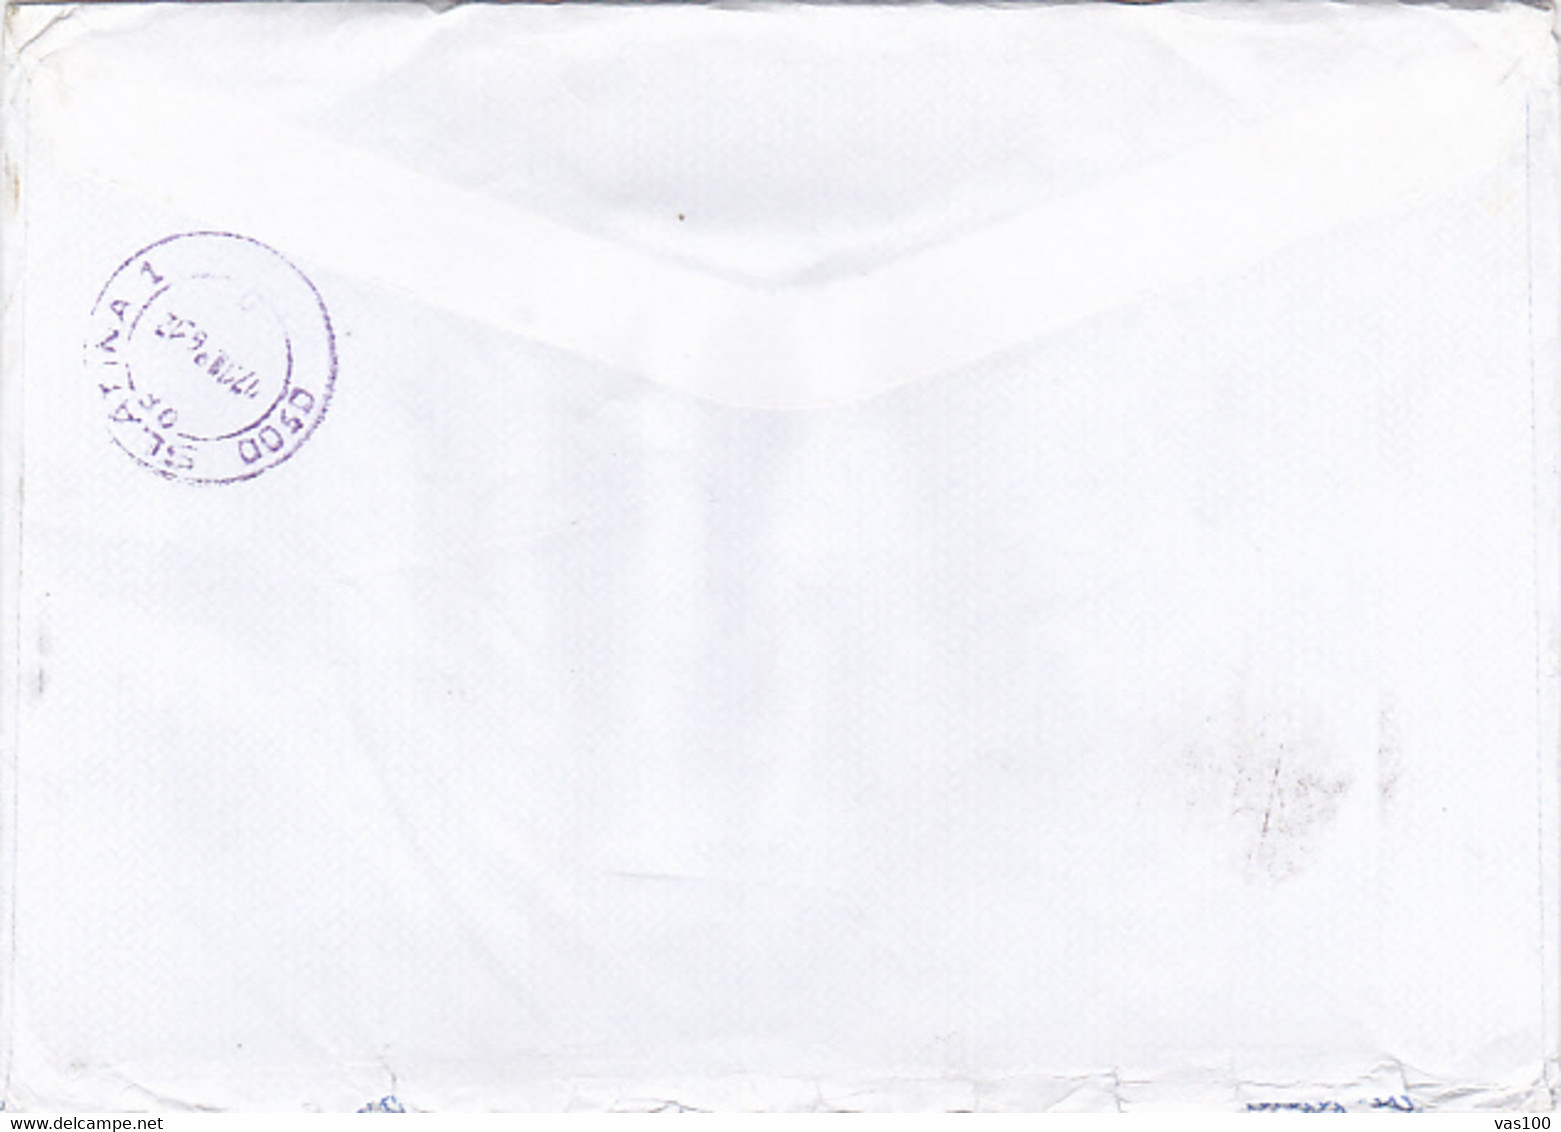 CINEMA, AUGUSTO HILARIO, STAMPS ON COVER, 1996, PORTUGAL - Covers & Documents